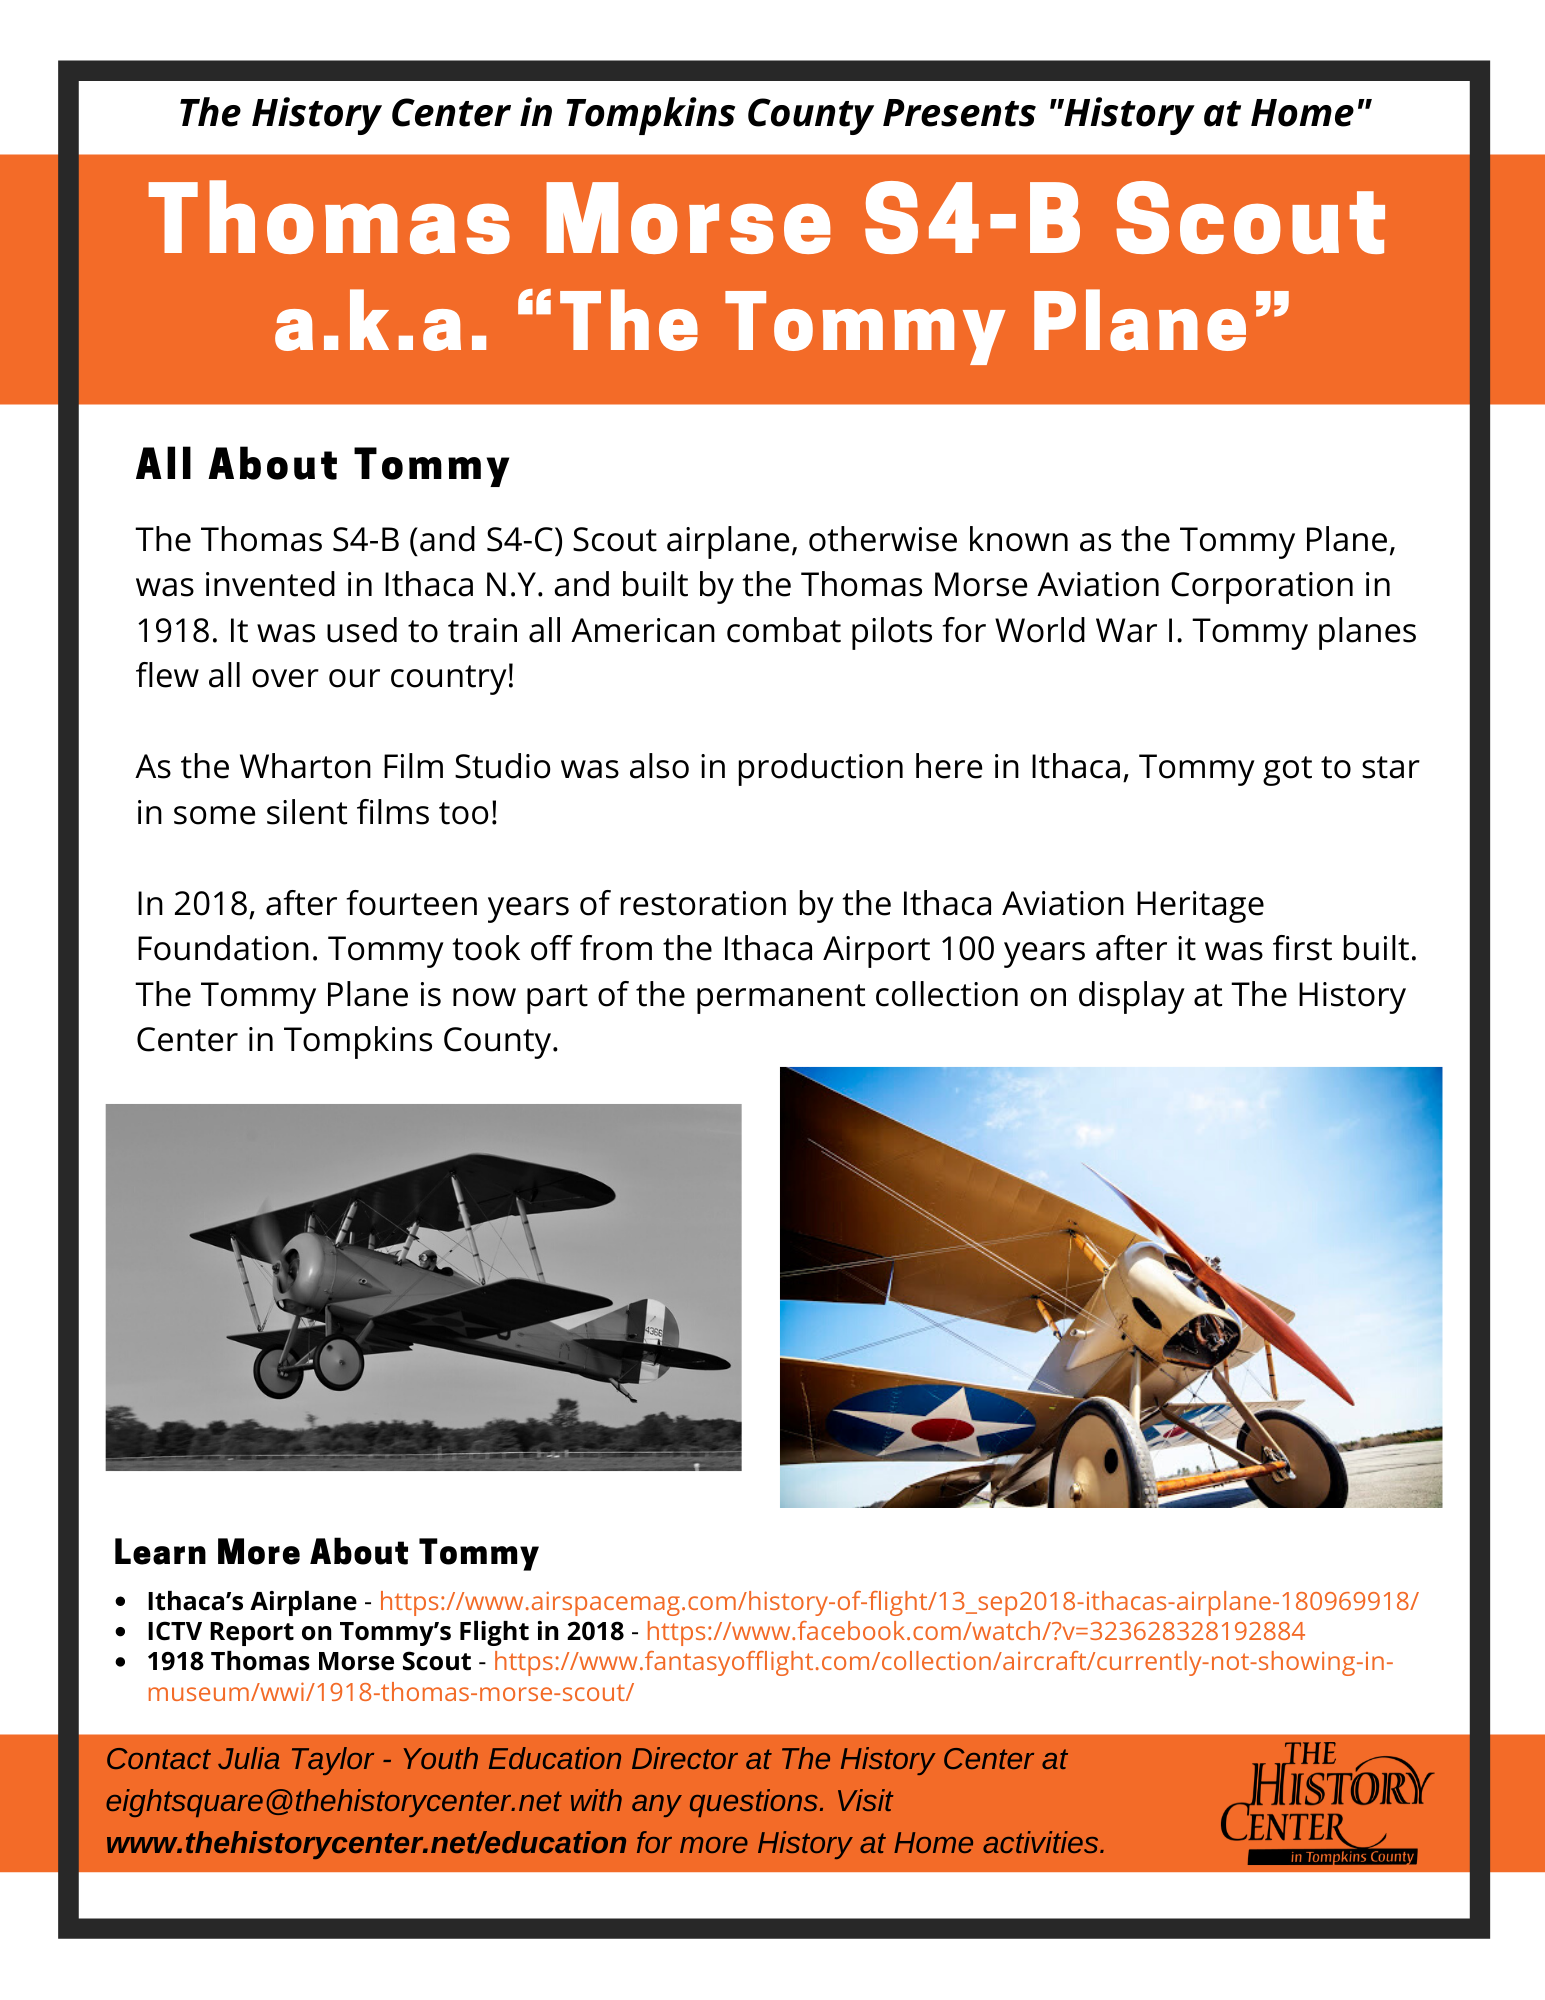 A link/image to a downloadable activity called "Thomas Morse S4-B Scout a.k.a. 'The Tommy Plane'".